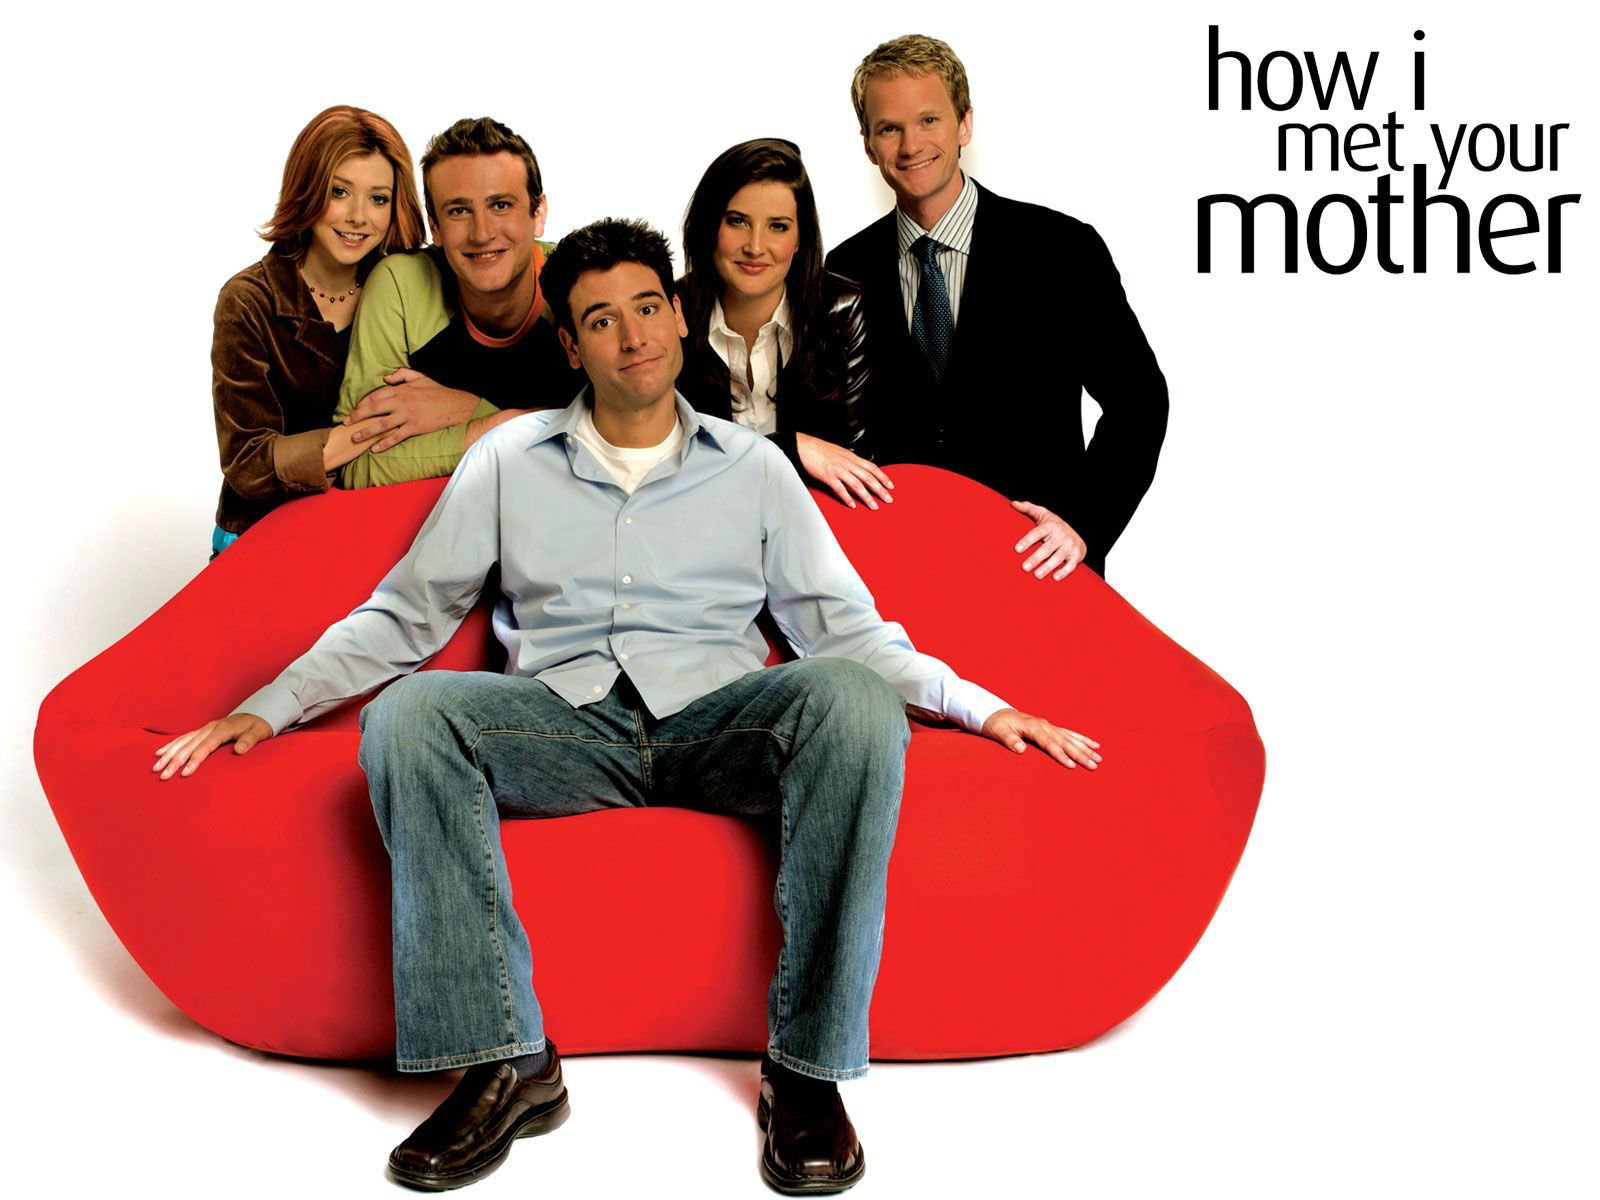 how i met your mother, Comedy, Sitcom, Series, Television, How, Met, Mother,  3 Wallpaper